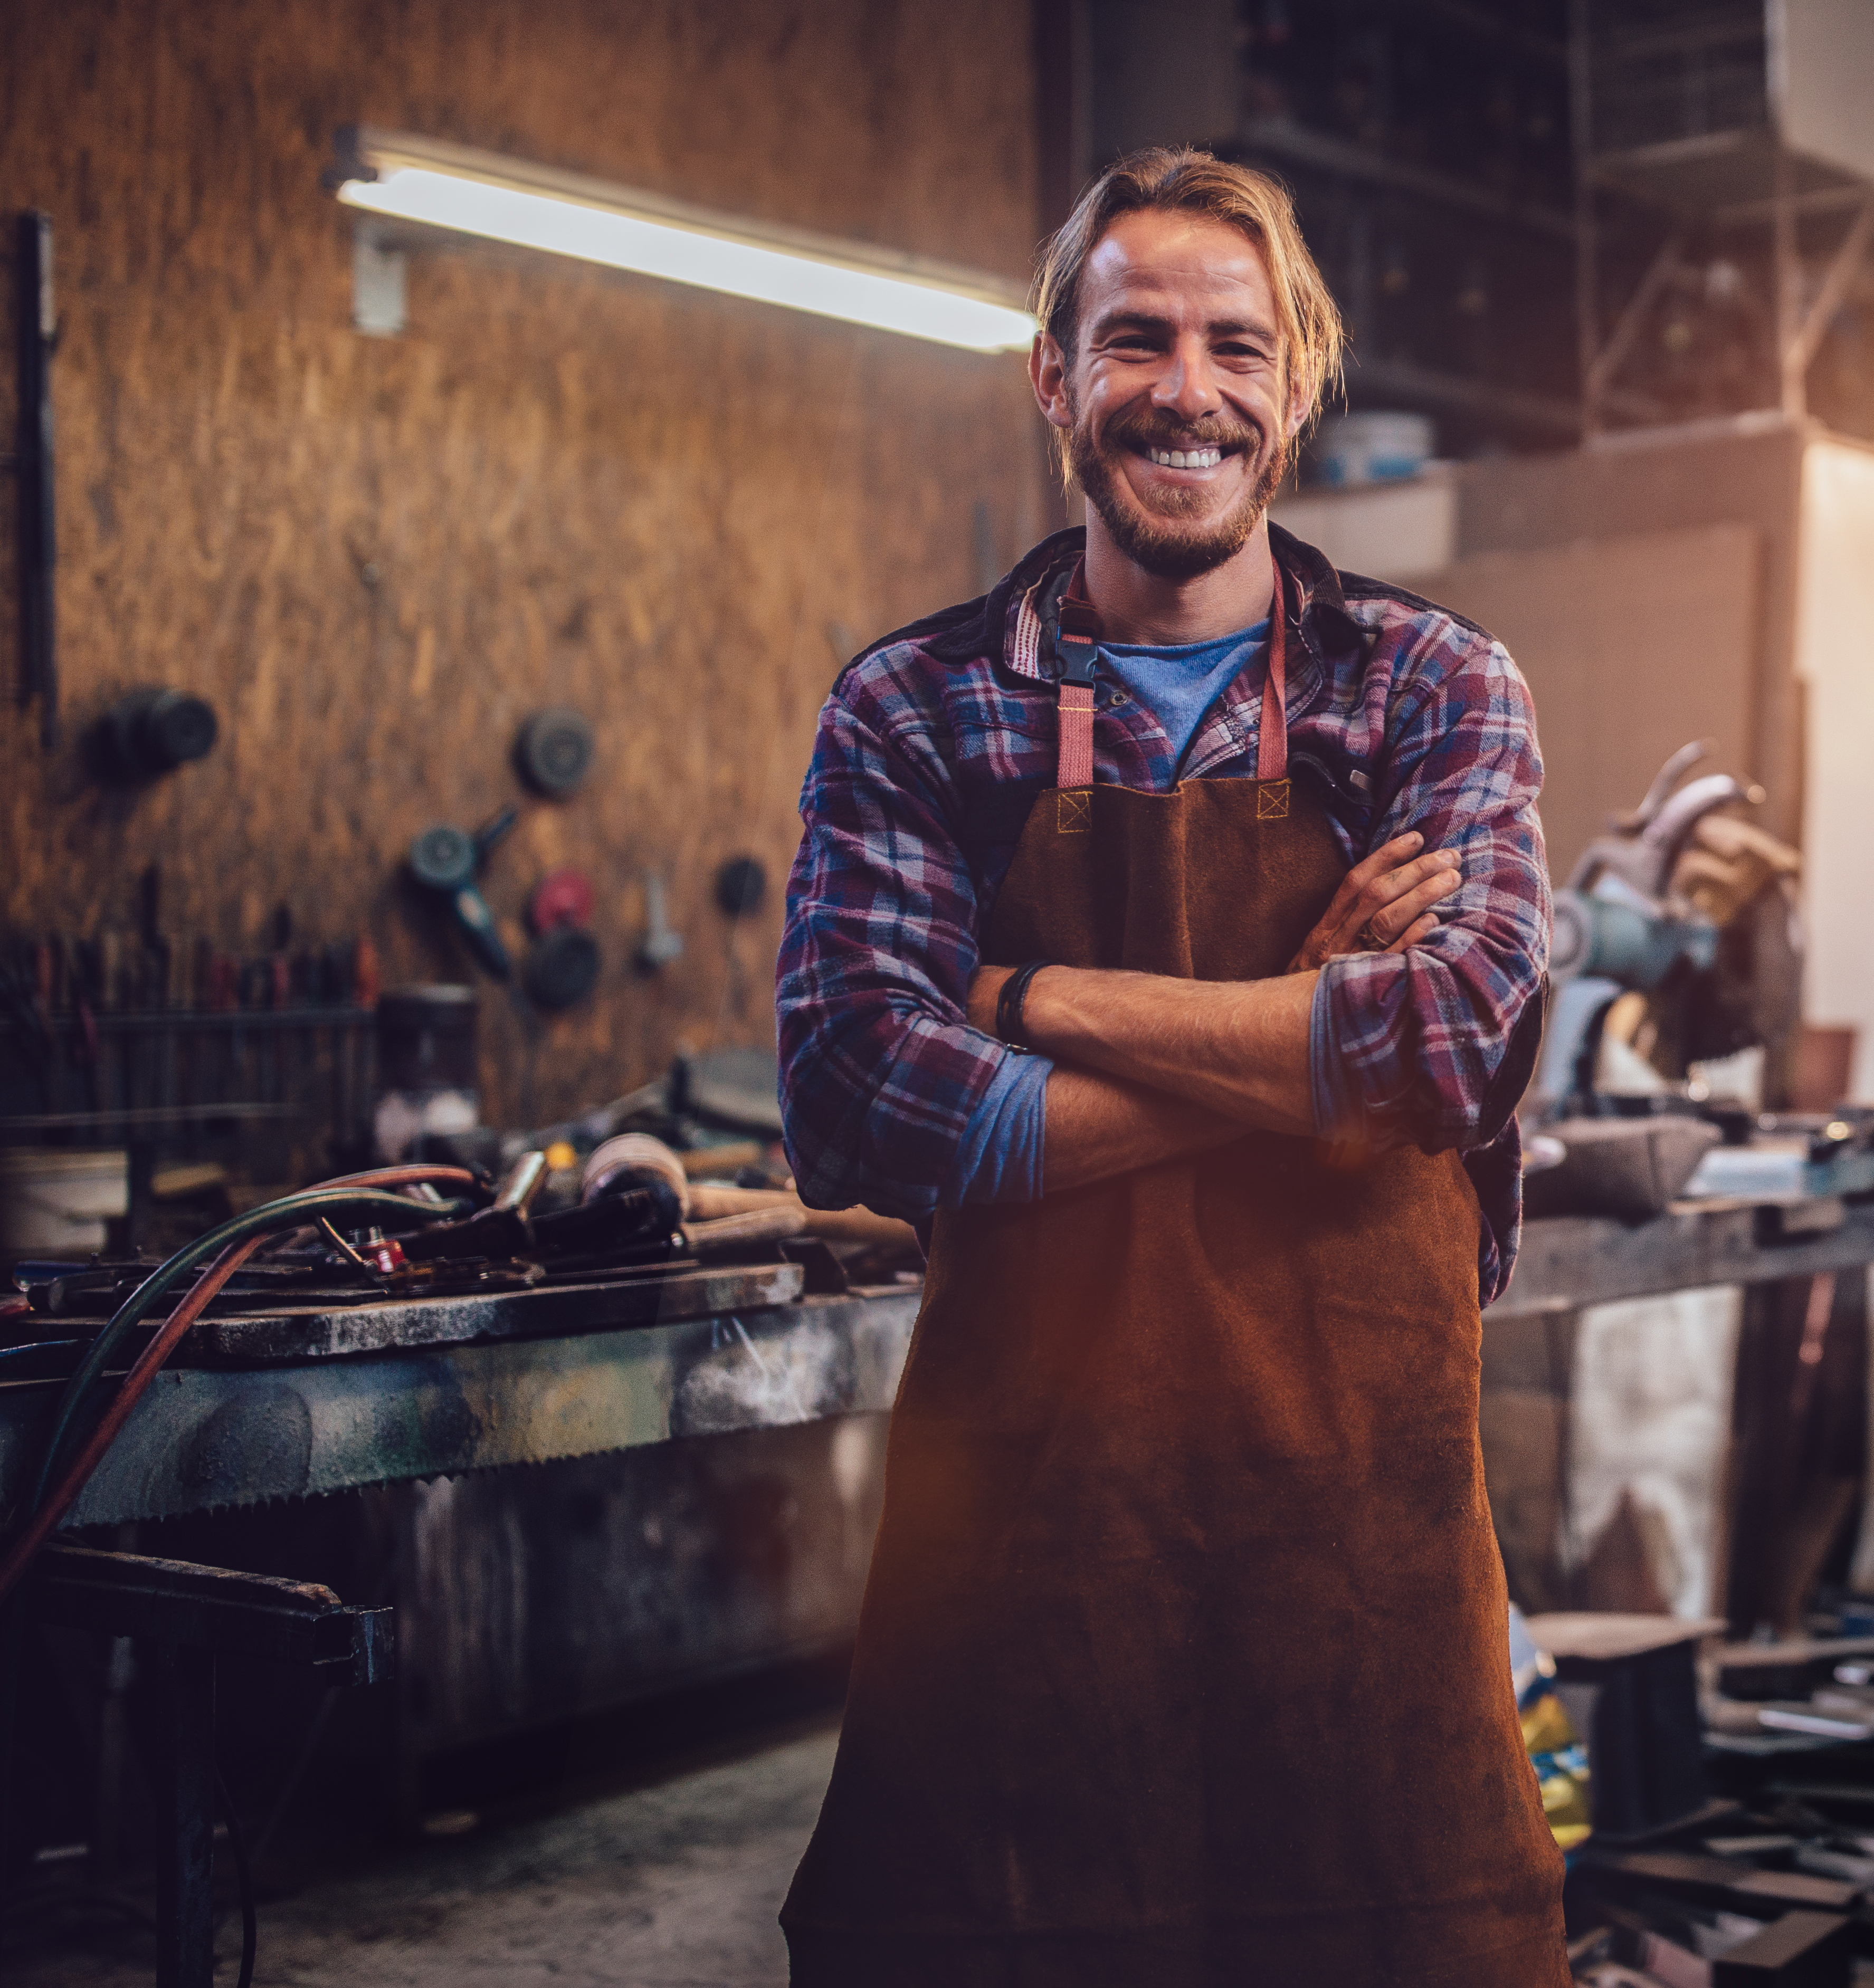 smiling mechanic standing in garage workshop with professional equipment